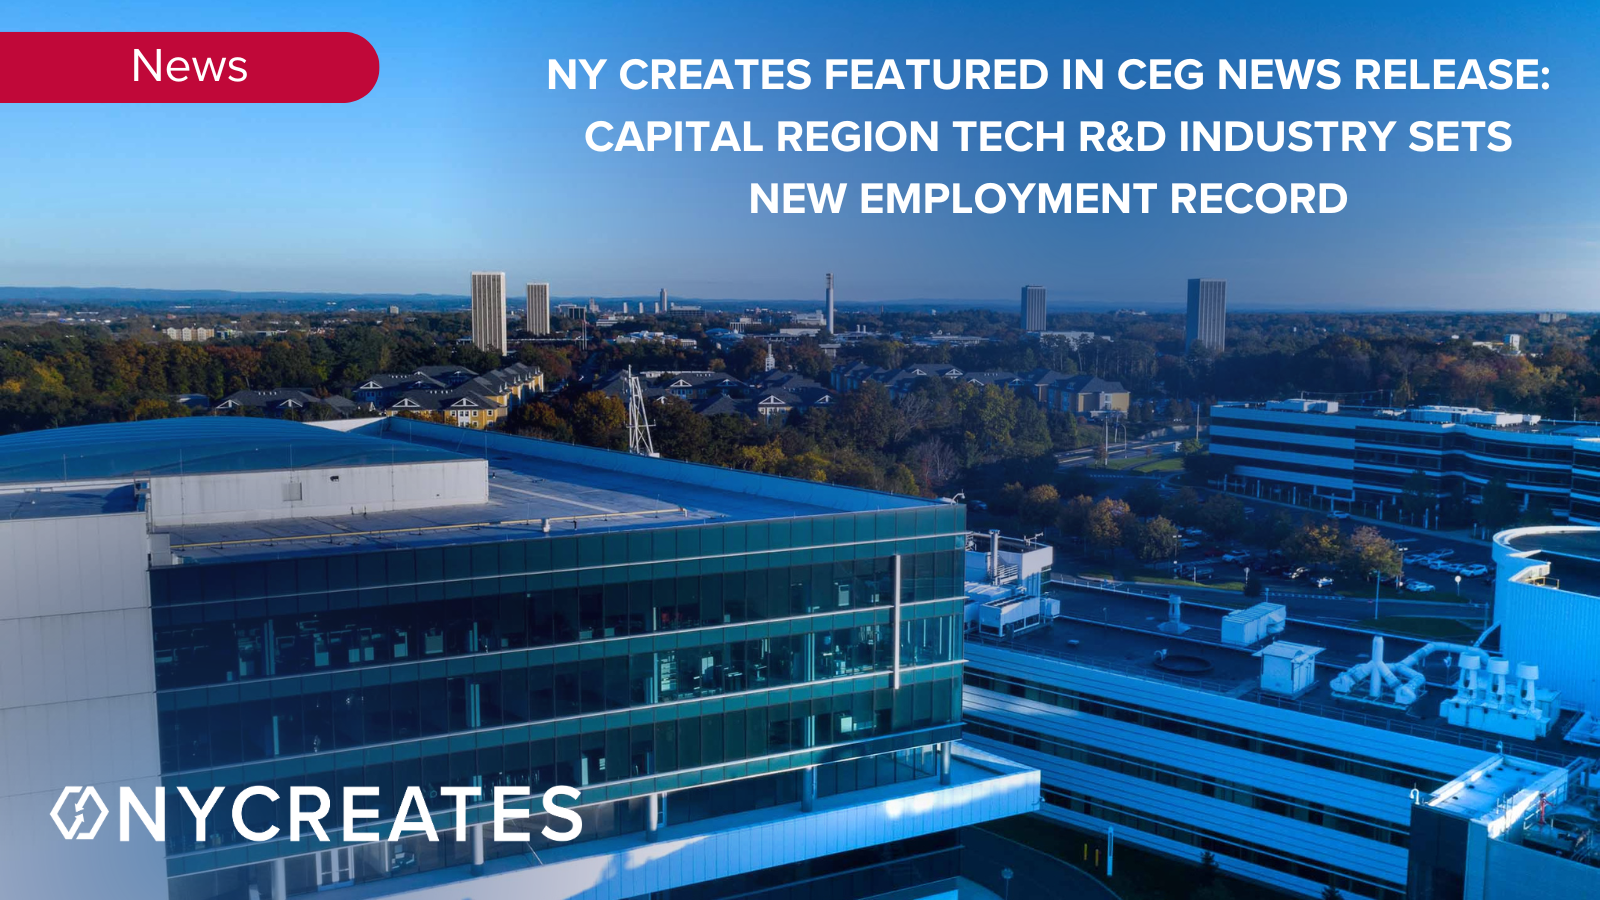 NY CREATES Featured in CEG News Release: Capital Region Tech R&D Industry Sets New Employment Record